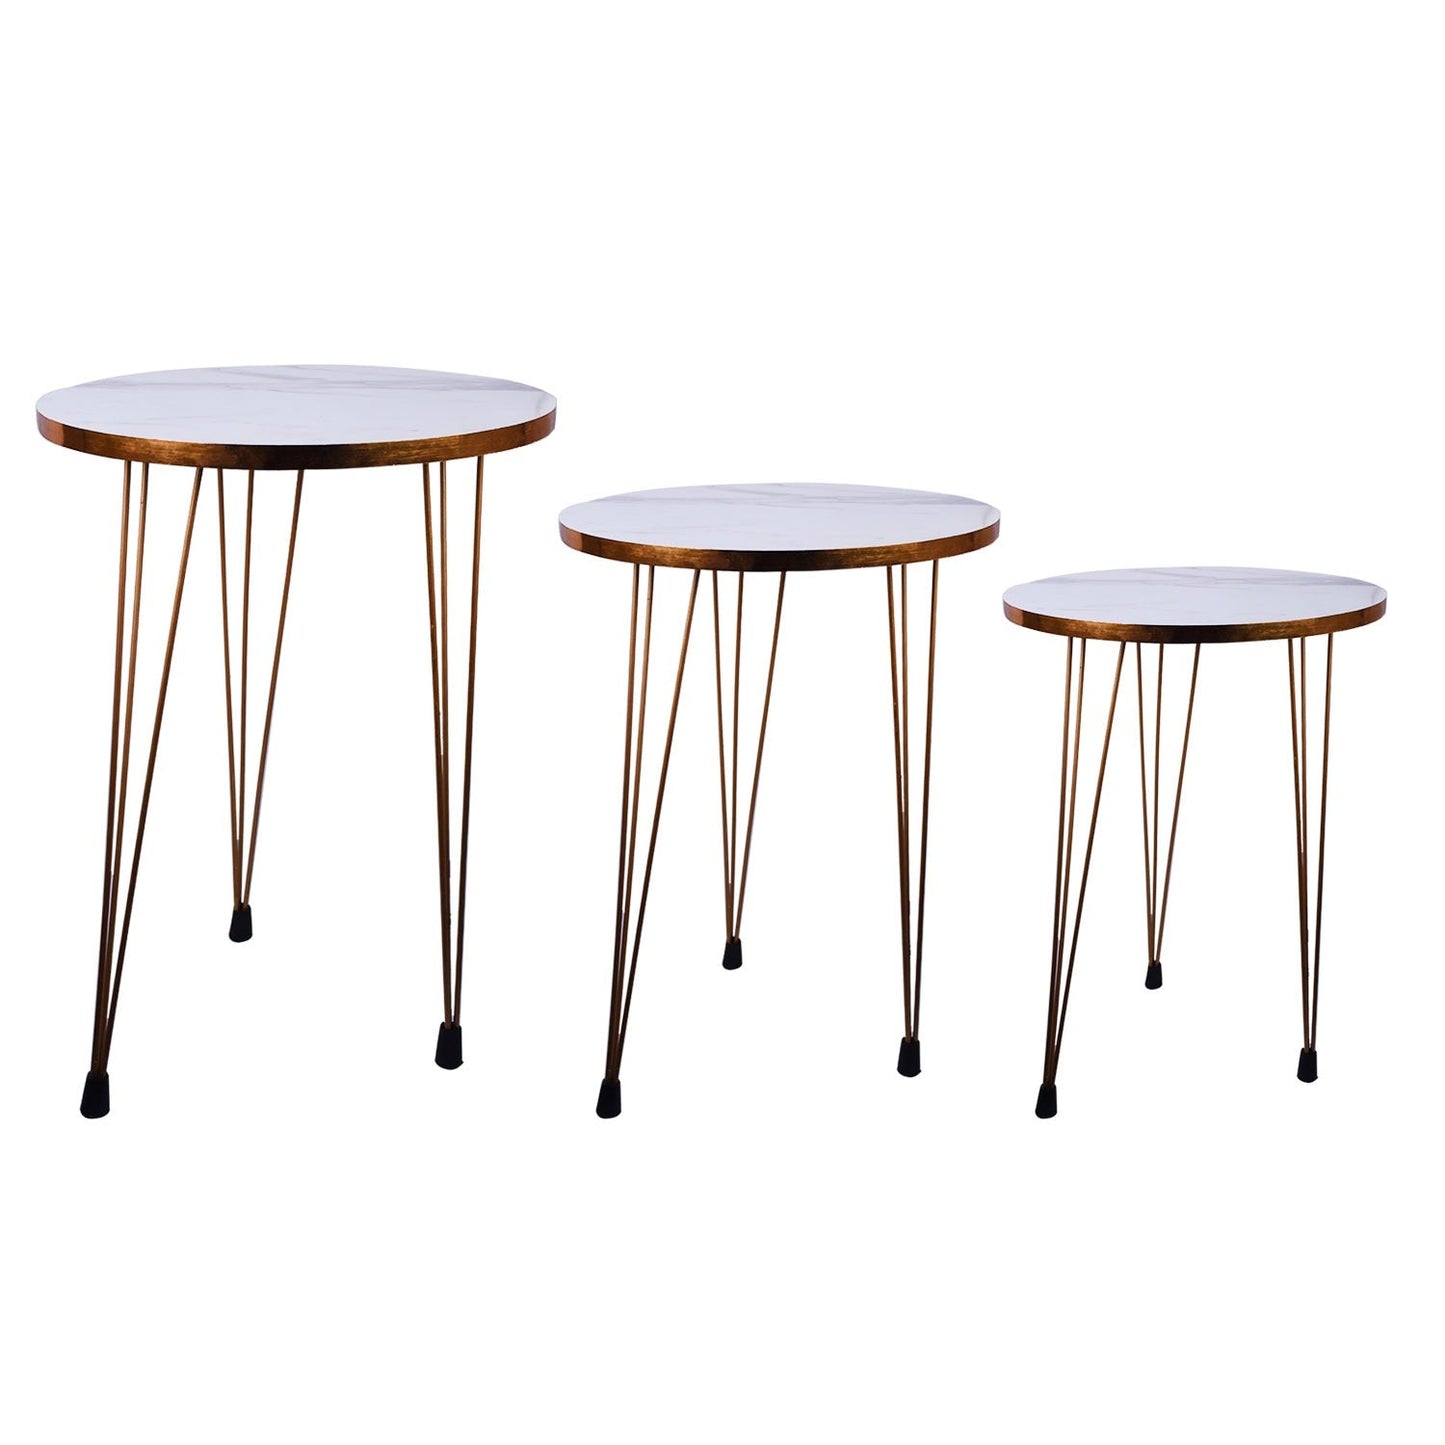 Decorative Home Decor Wooden Round Nesting Side Tables 3 Sizes Set